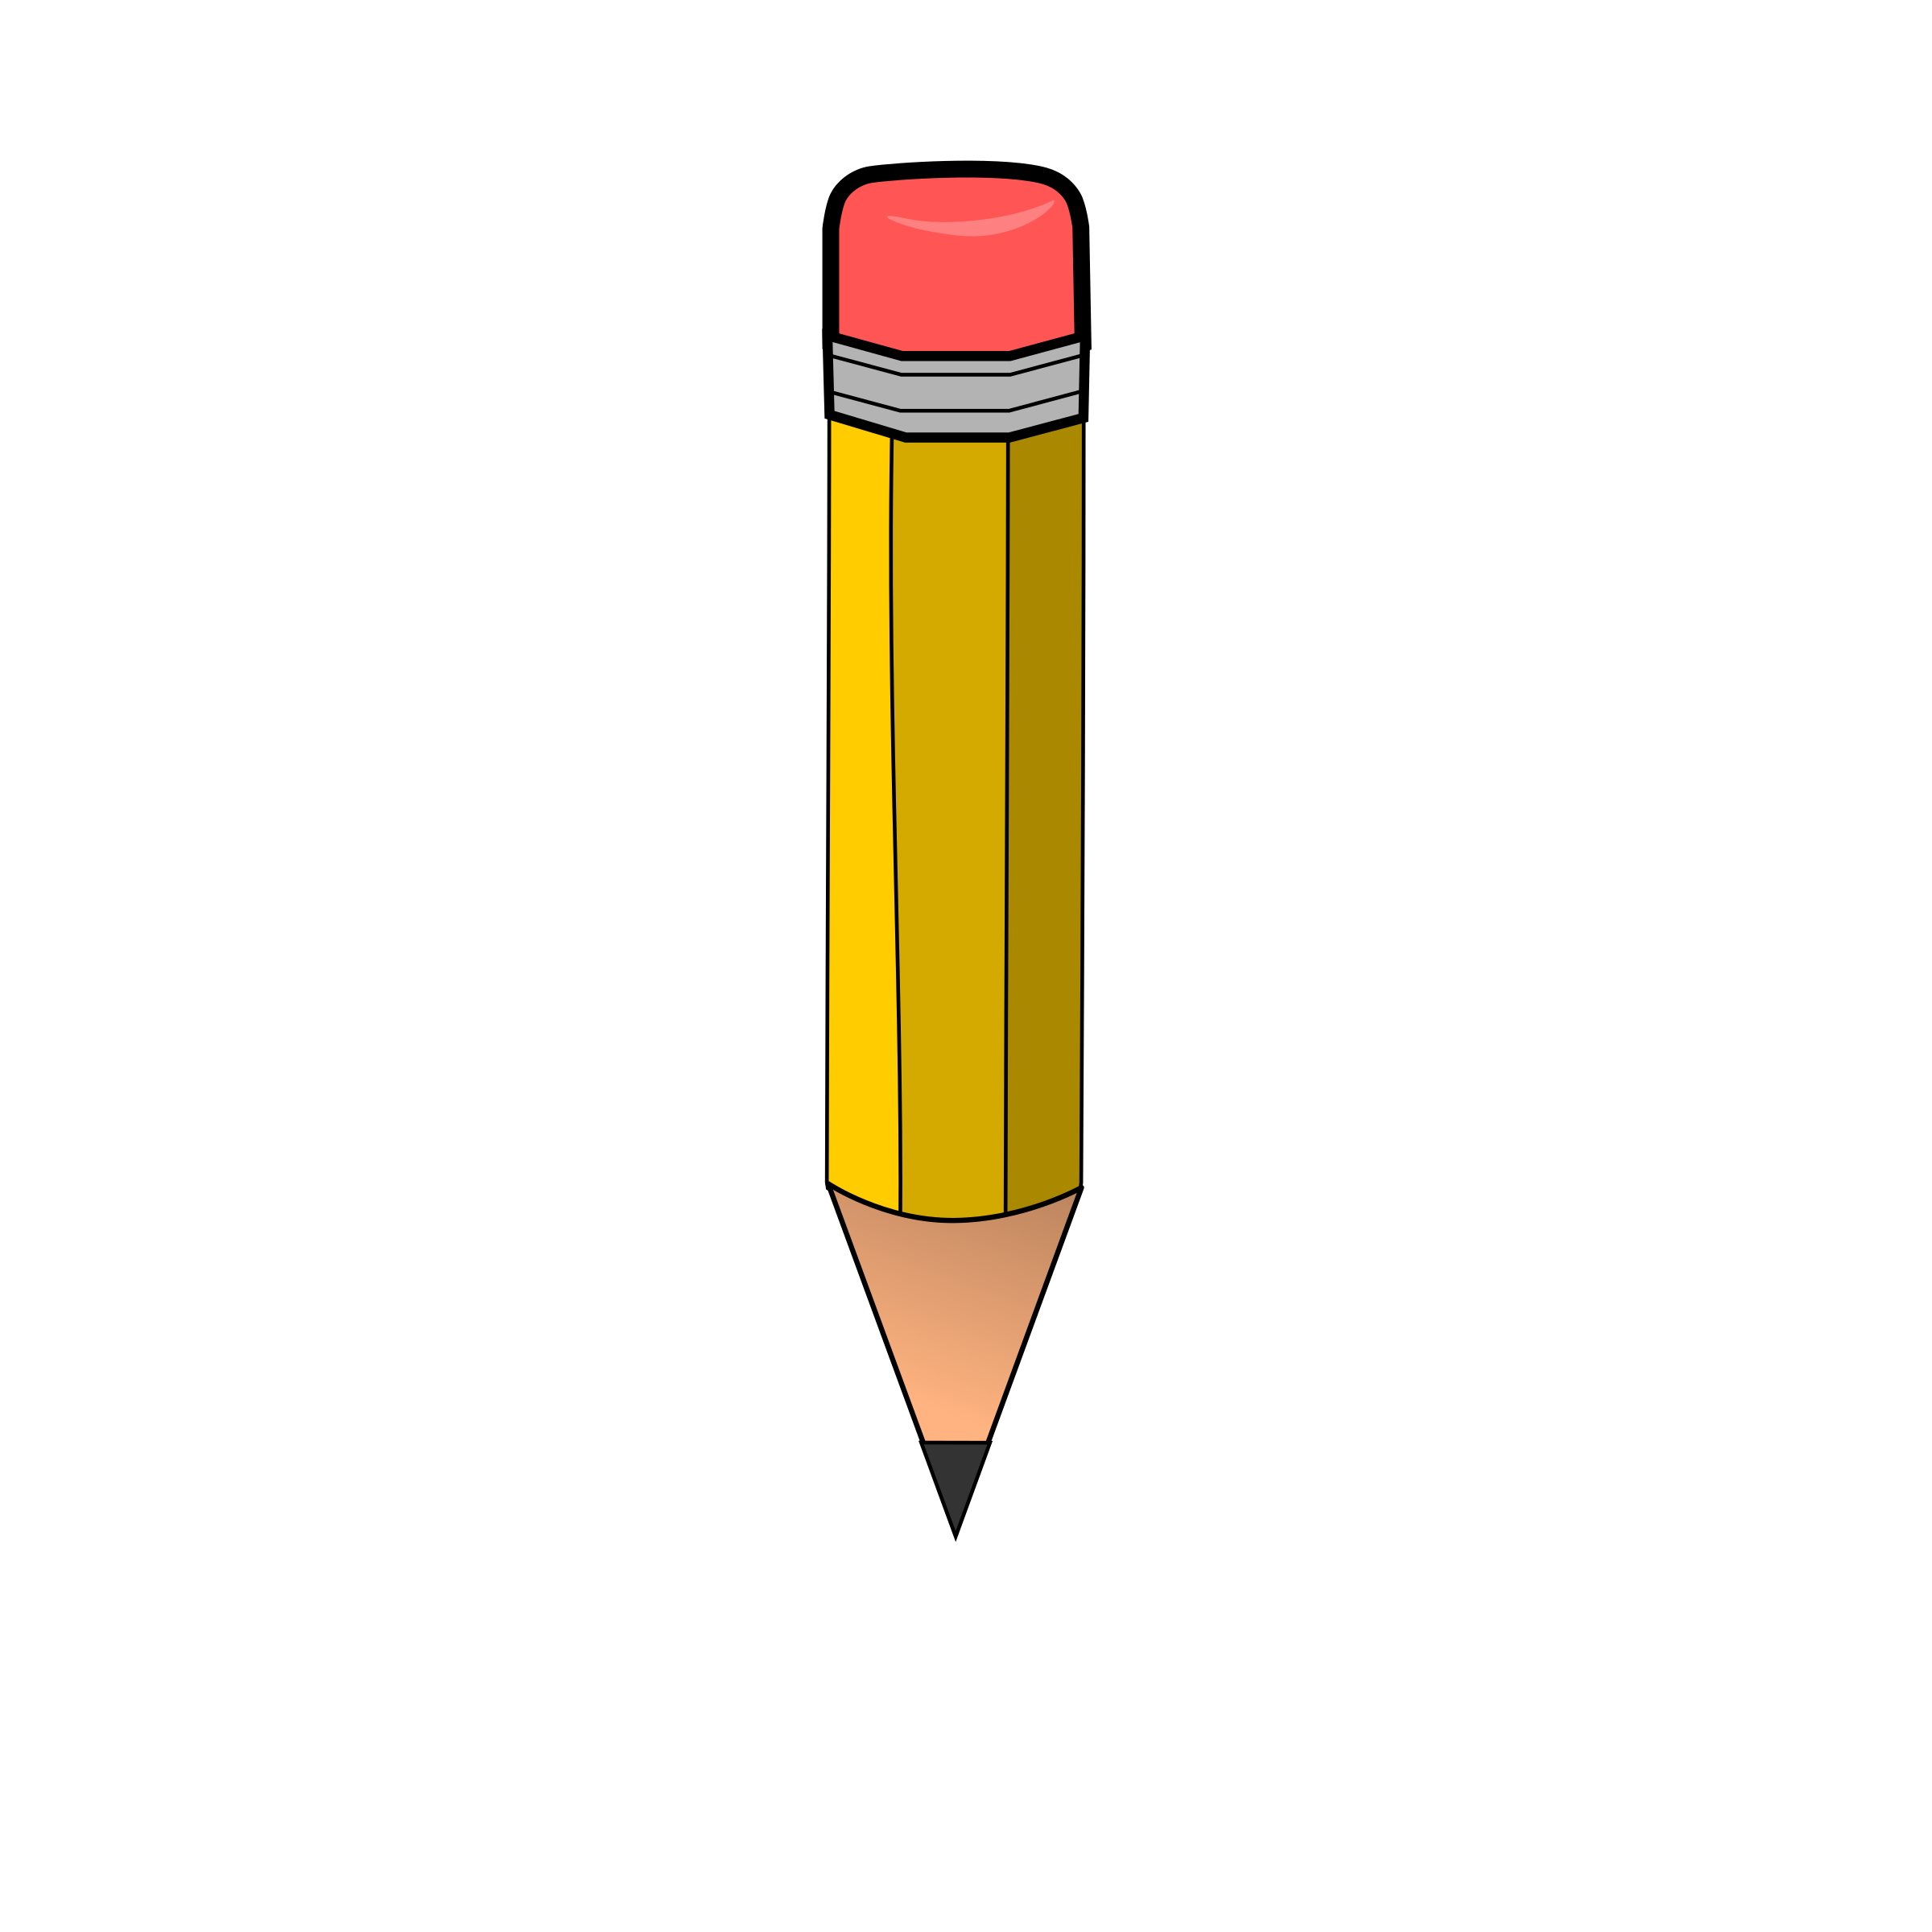 Animated pencil clipart.